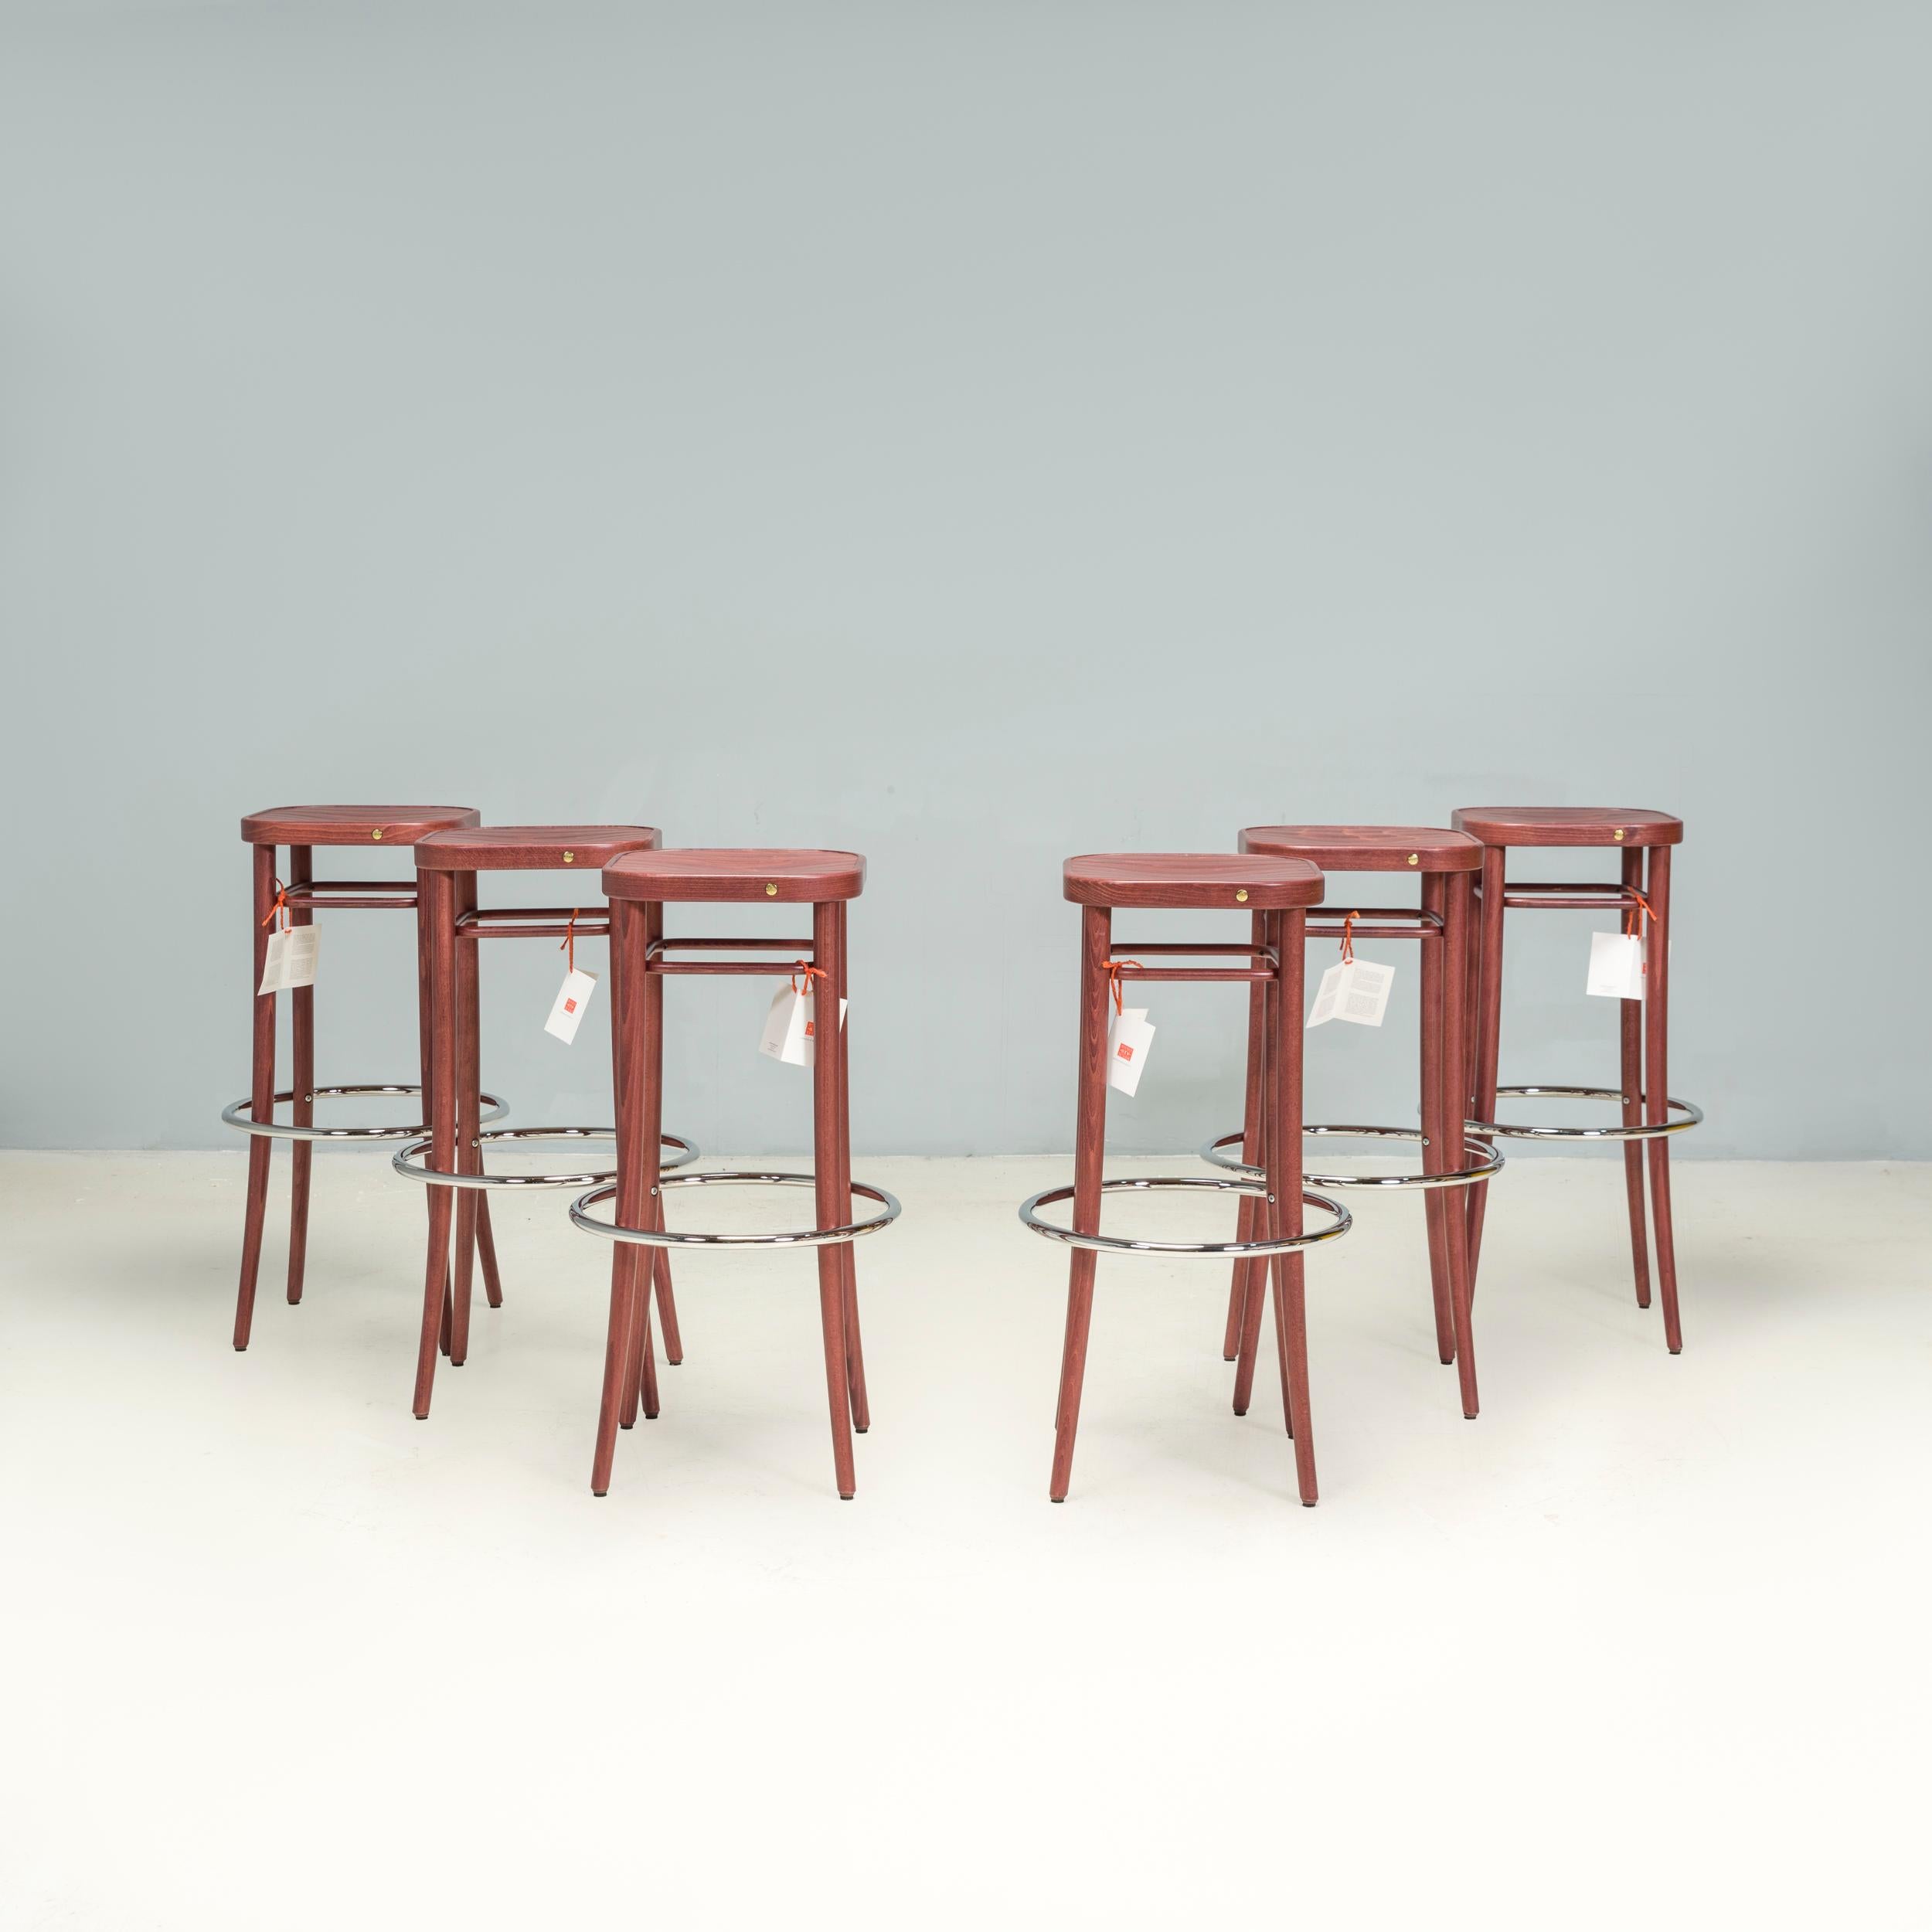 Originally designed in 1908 by August Thonet, the Barhocker stool uses the same techniques as the iconic bentwood chairs from the same era.

Manufactured by Gebrüder Thonet Vienna in 2015, this set of six  stools are constructed from walnut